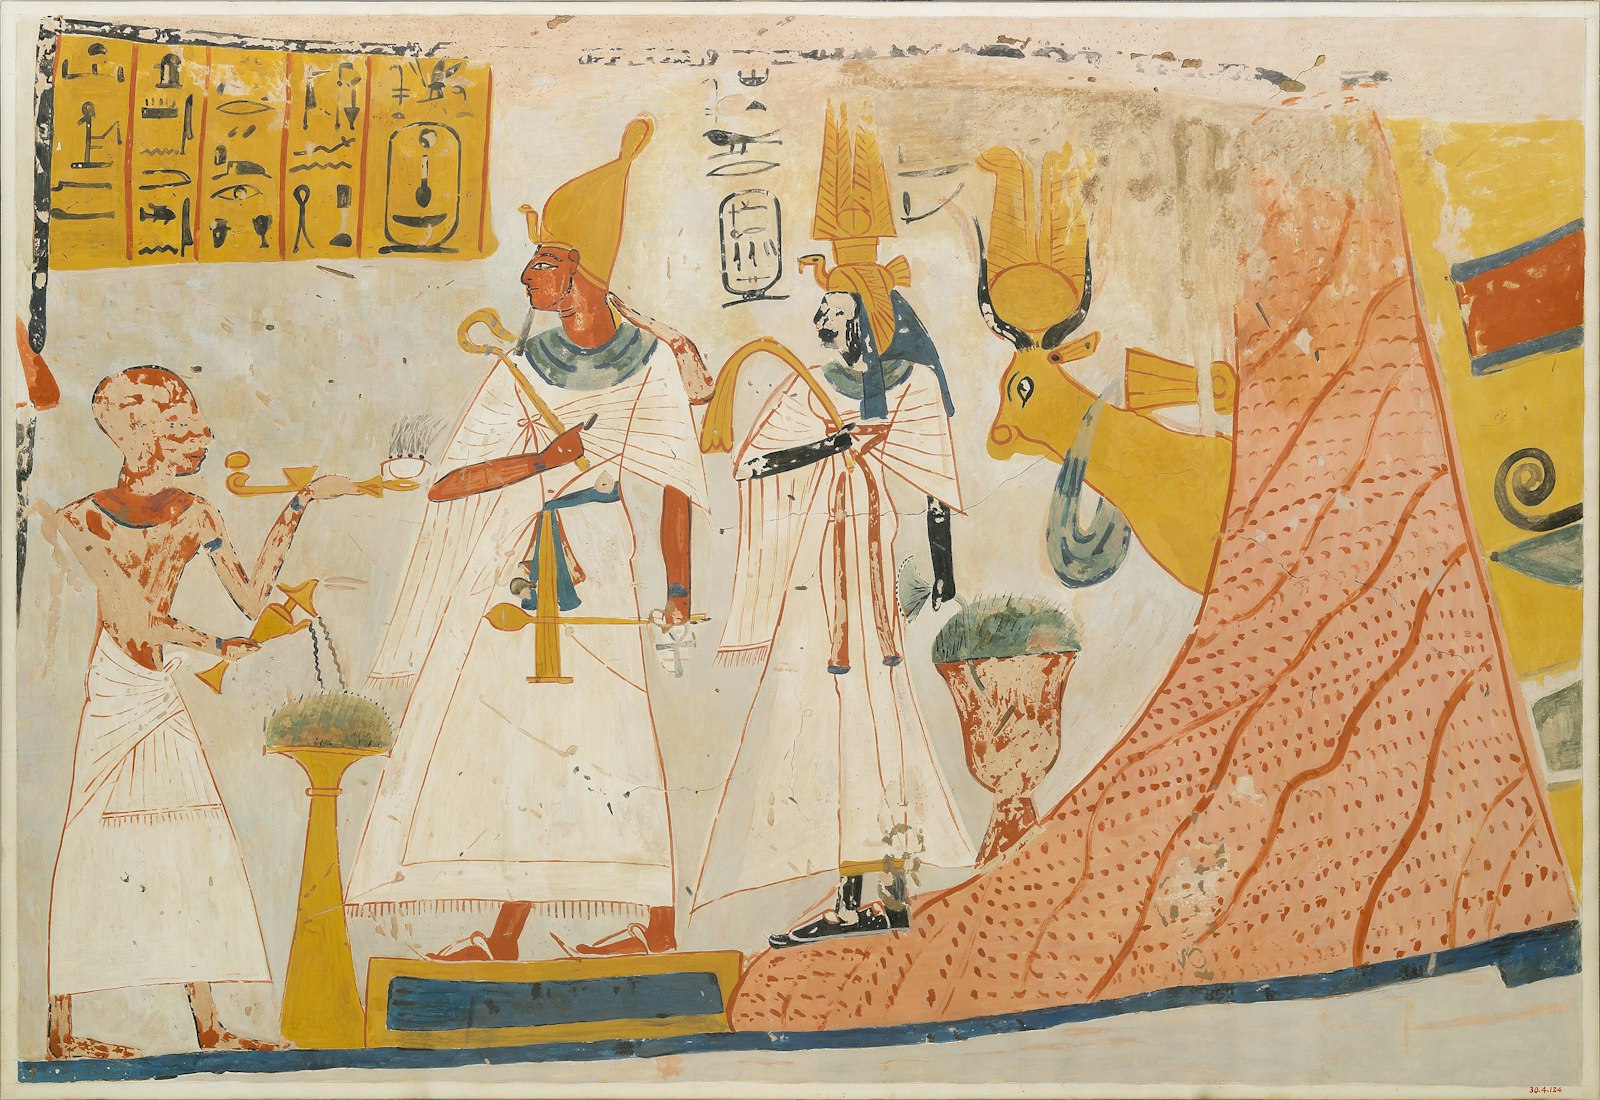 Deceased censing and libating to the deified Mentuhotep and Ahmose-Nefertari, with the Hathor cow emerging from the mountain; Tomb of Ameneminet